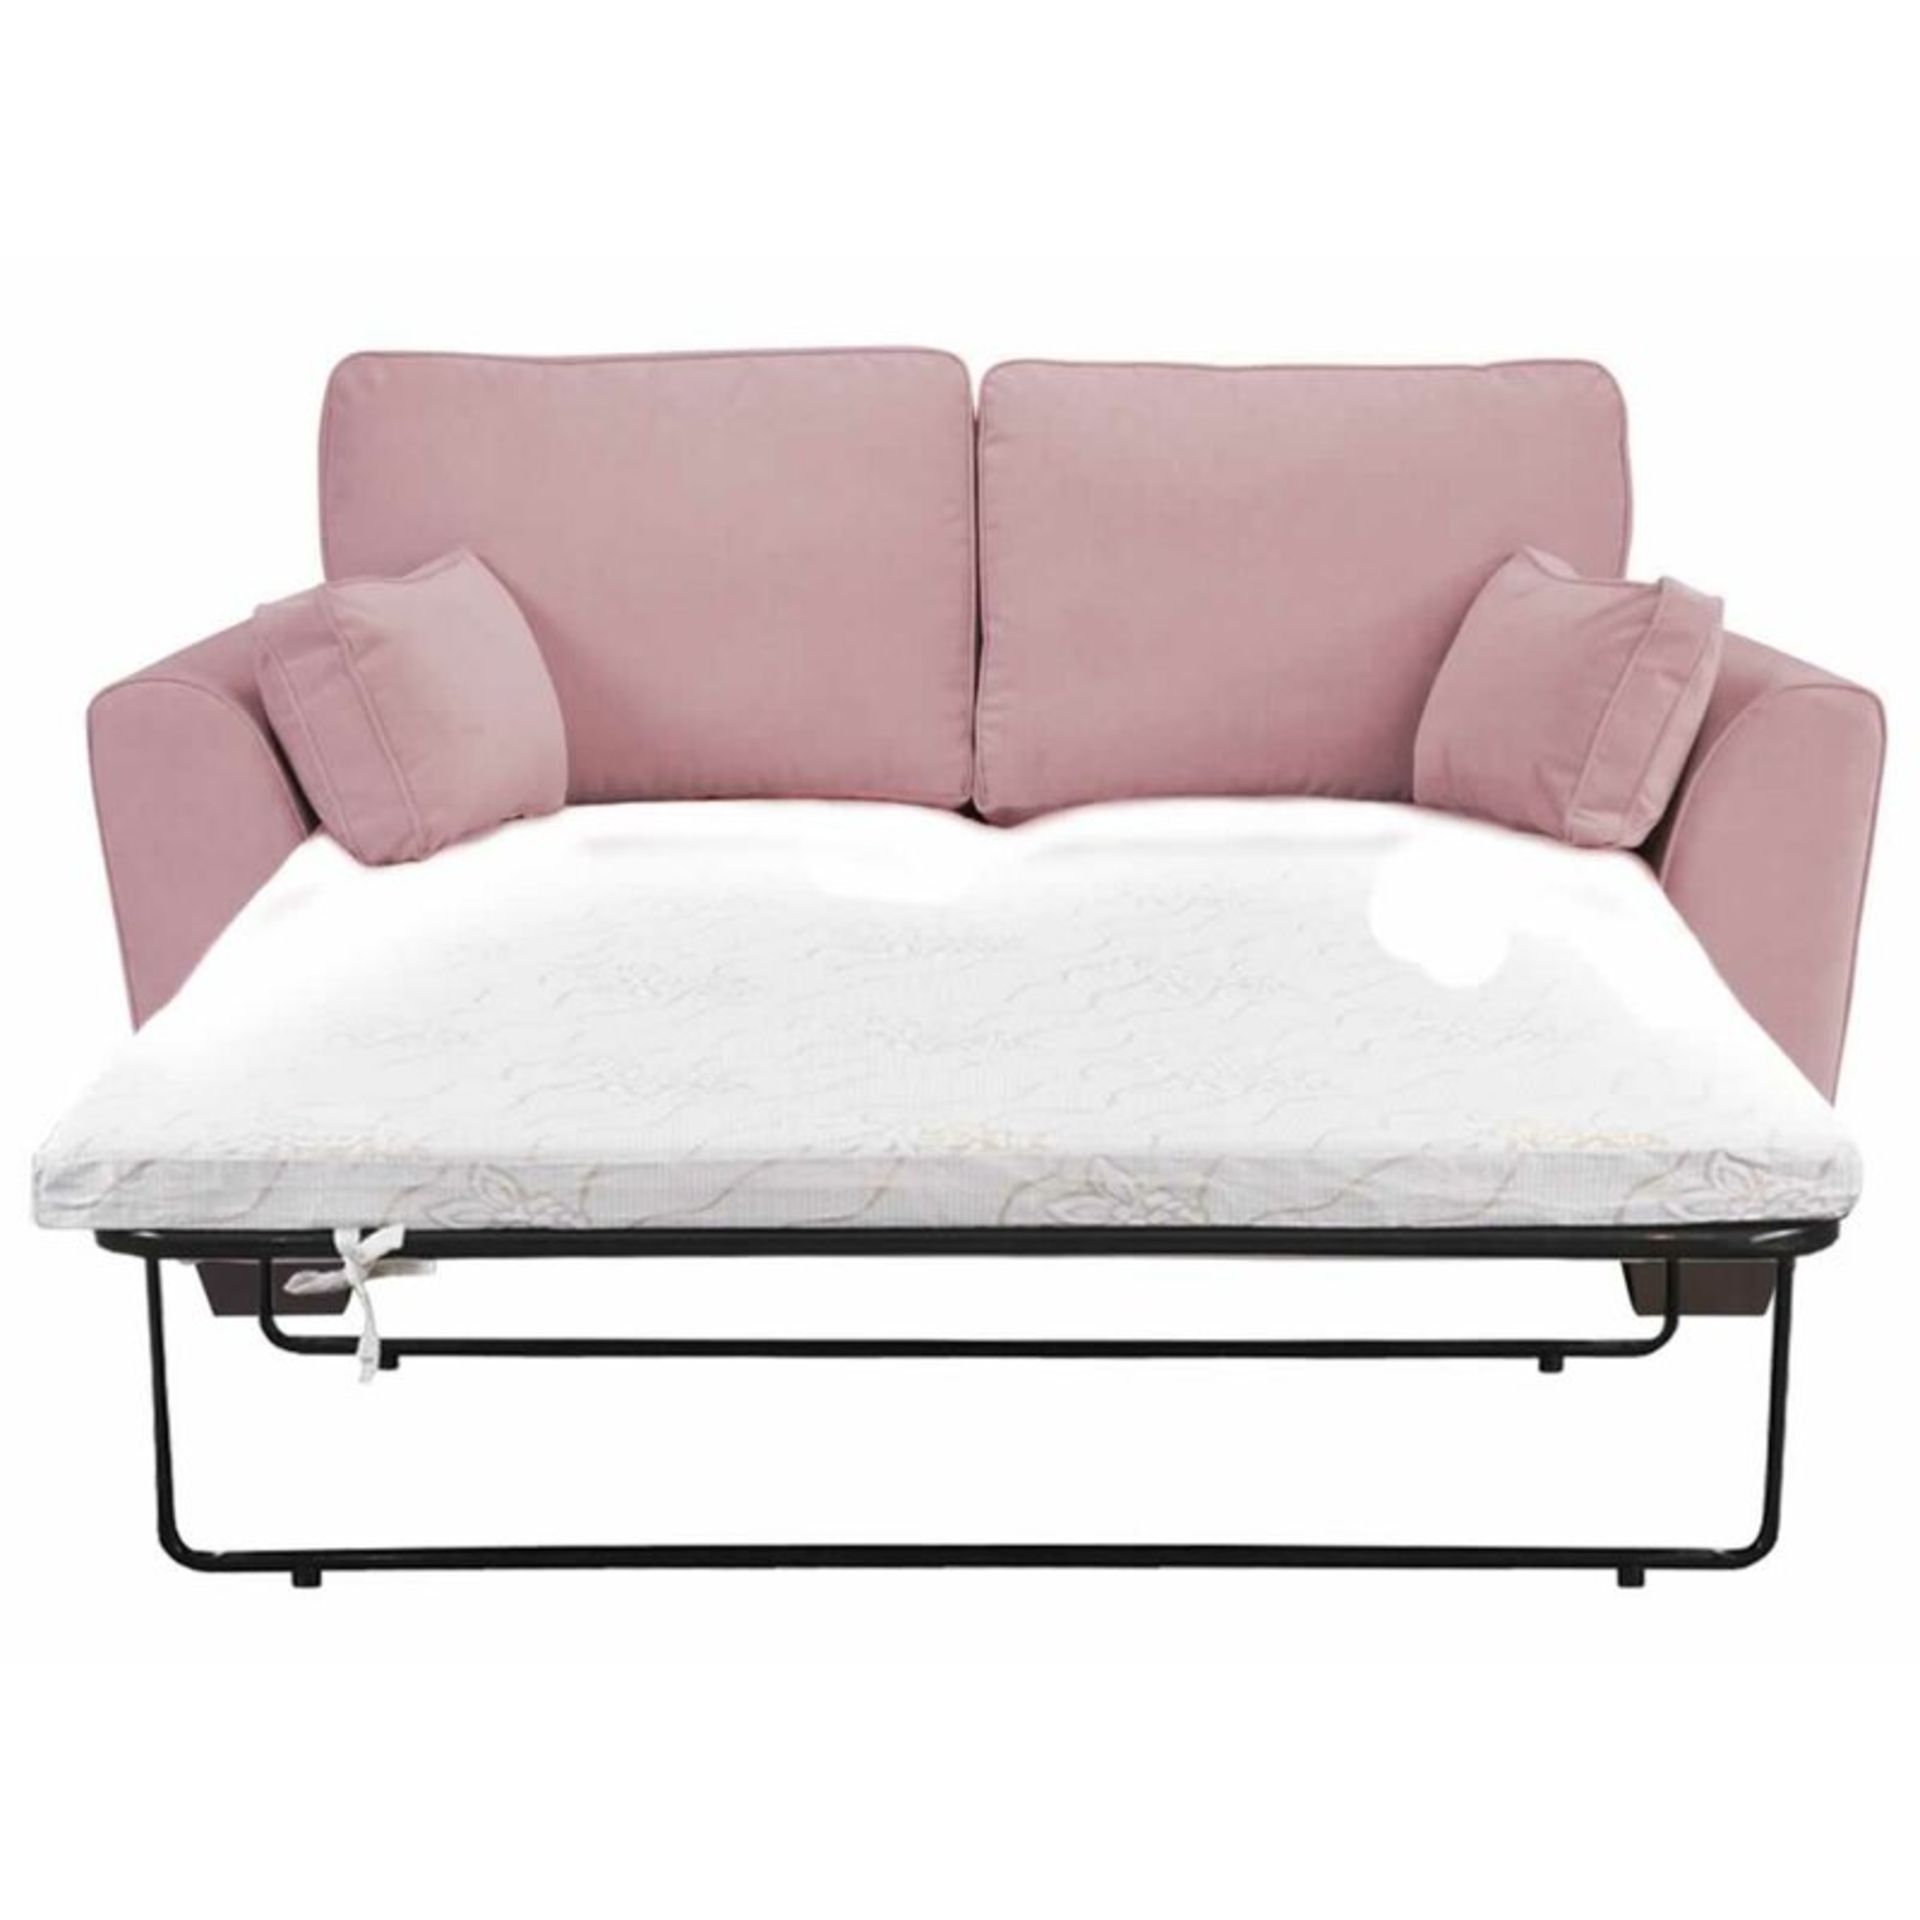 Bulma 2 Seater Fold Out Sofa Bed RRP £609.00 (COLLECTION ONLY) - Image 2 of 3